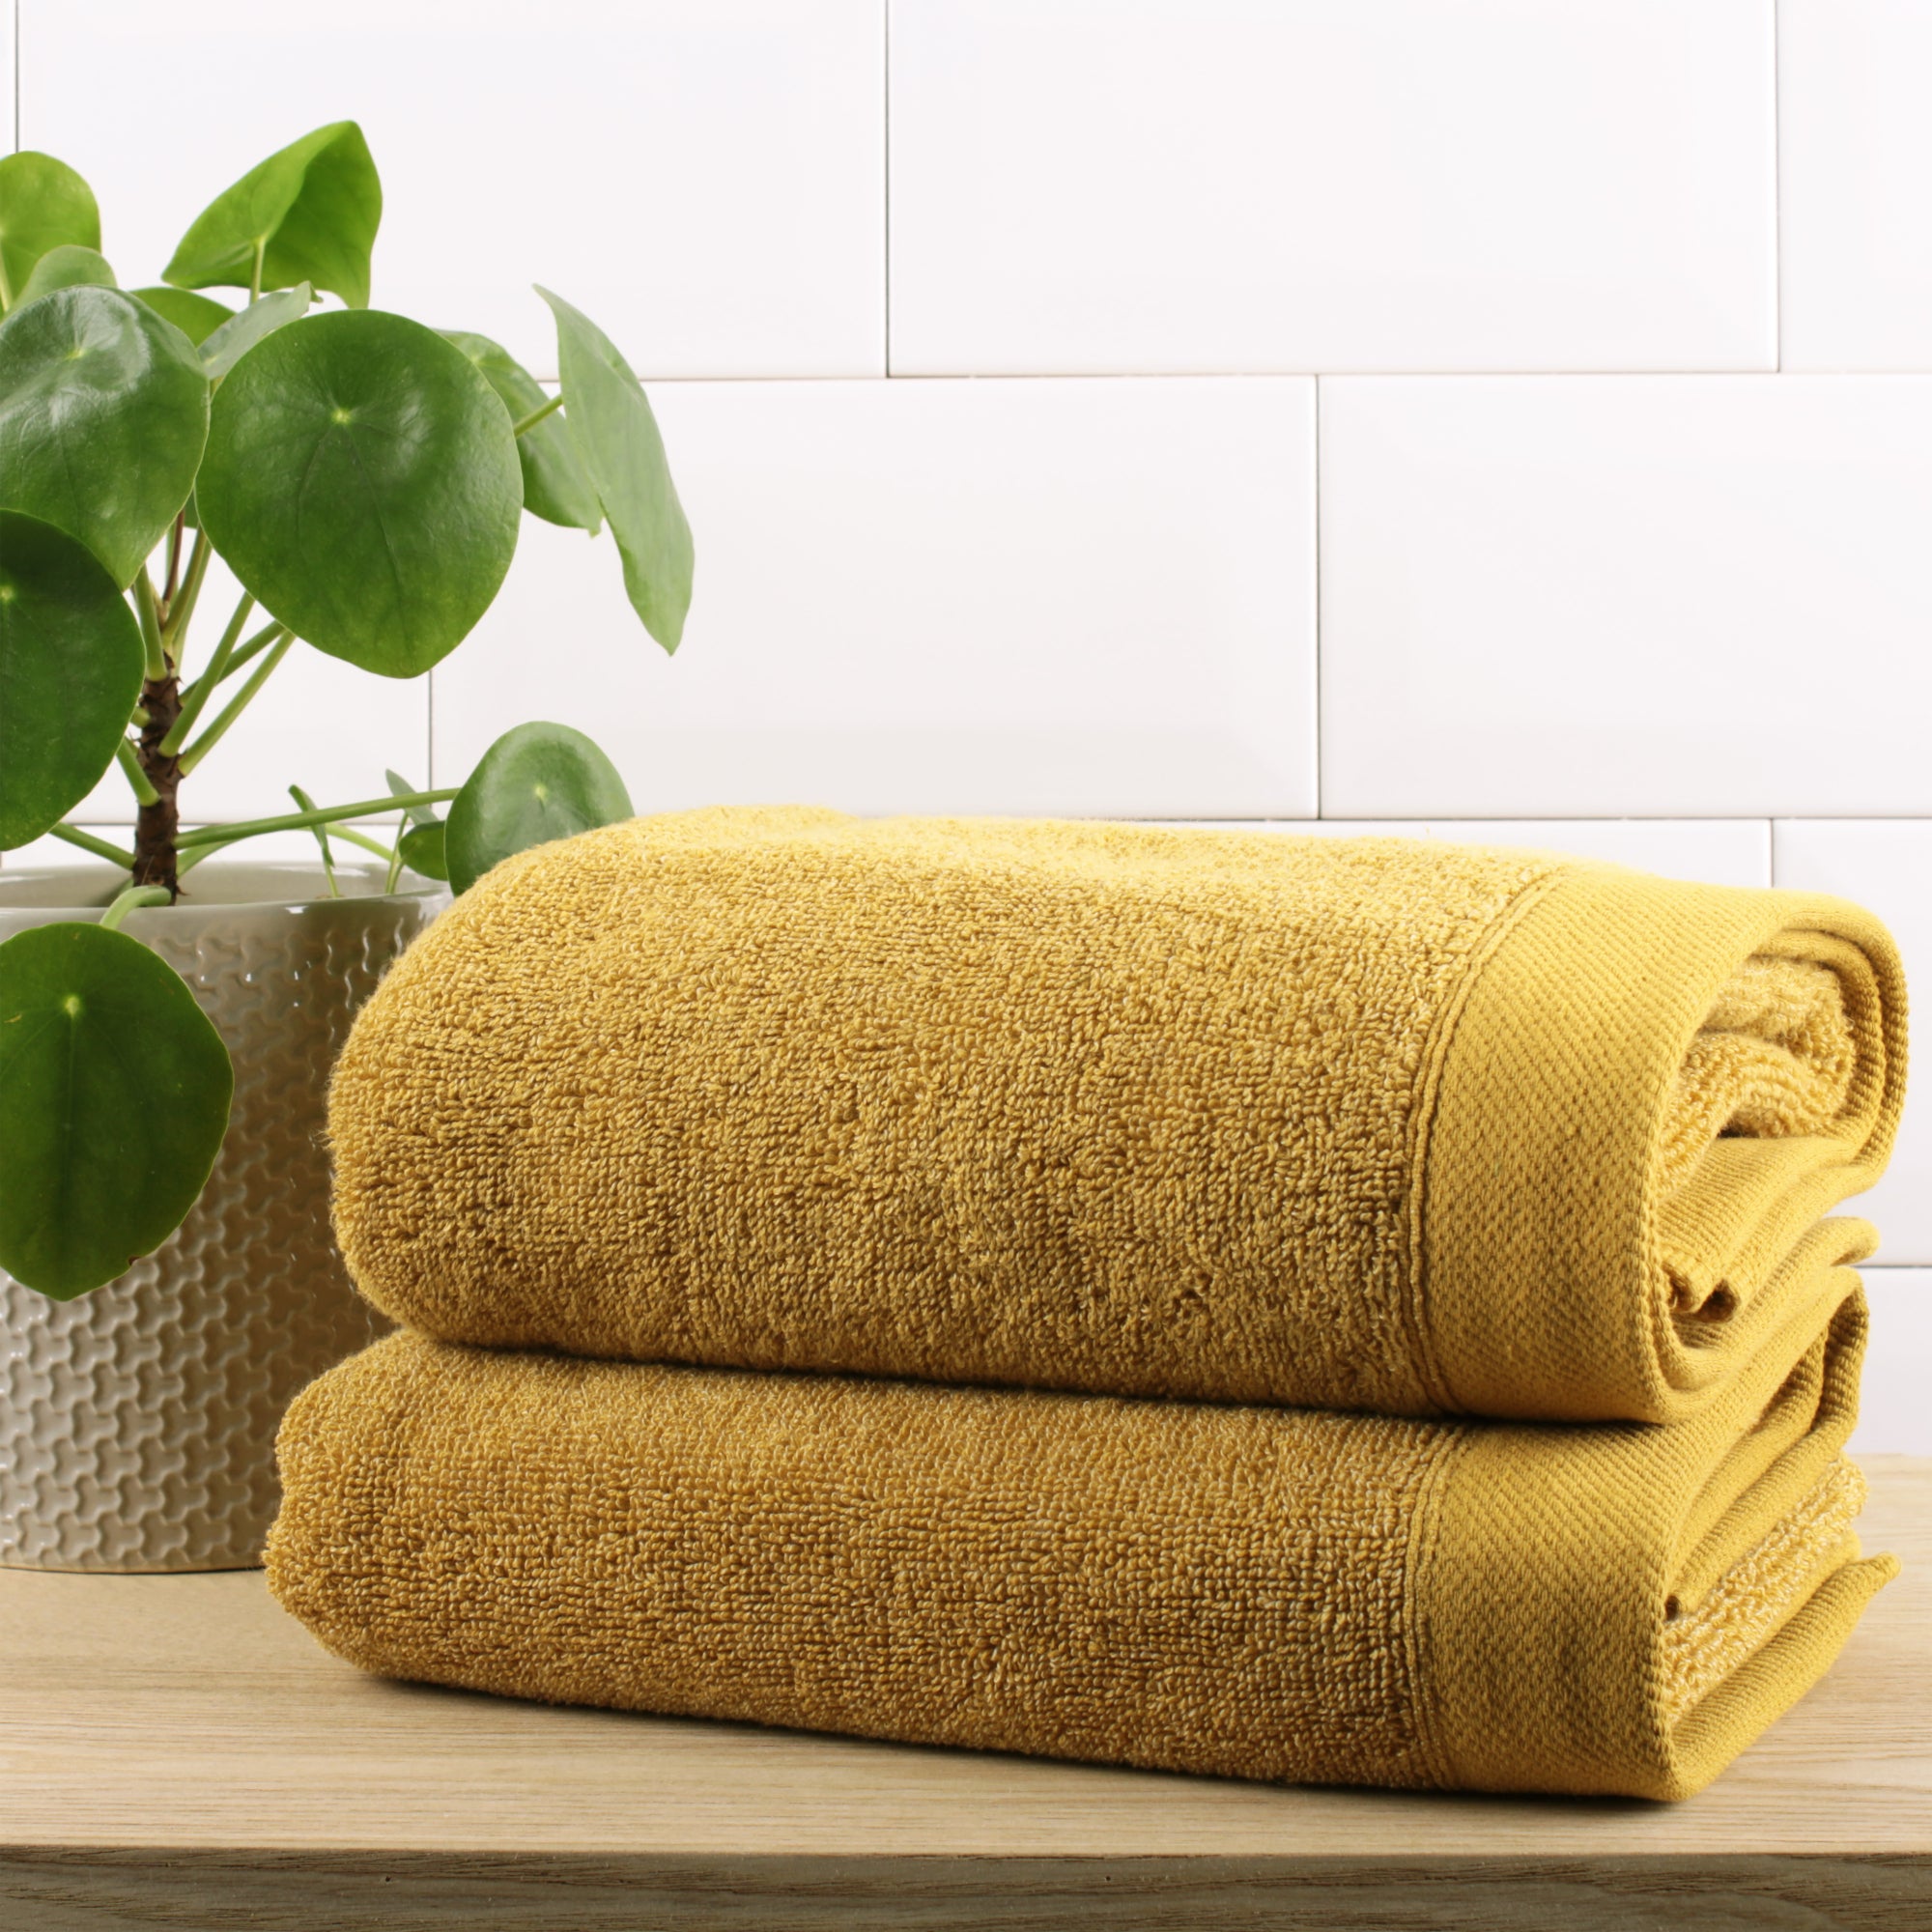 Hand Towel (2 pack) Abode Eco by Drift Home in Ochre